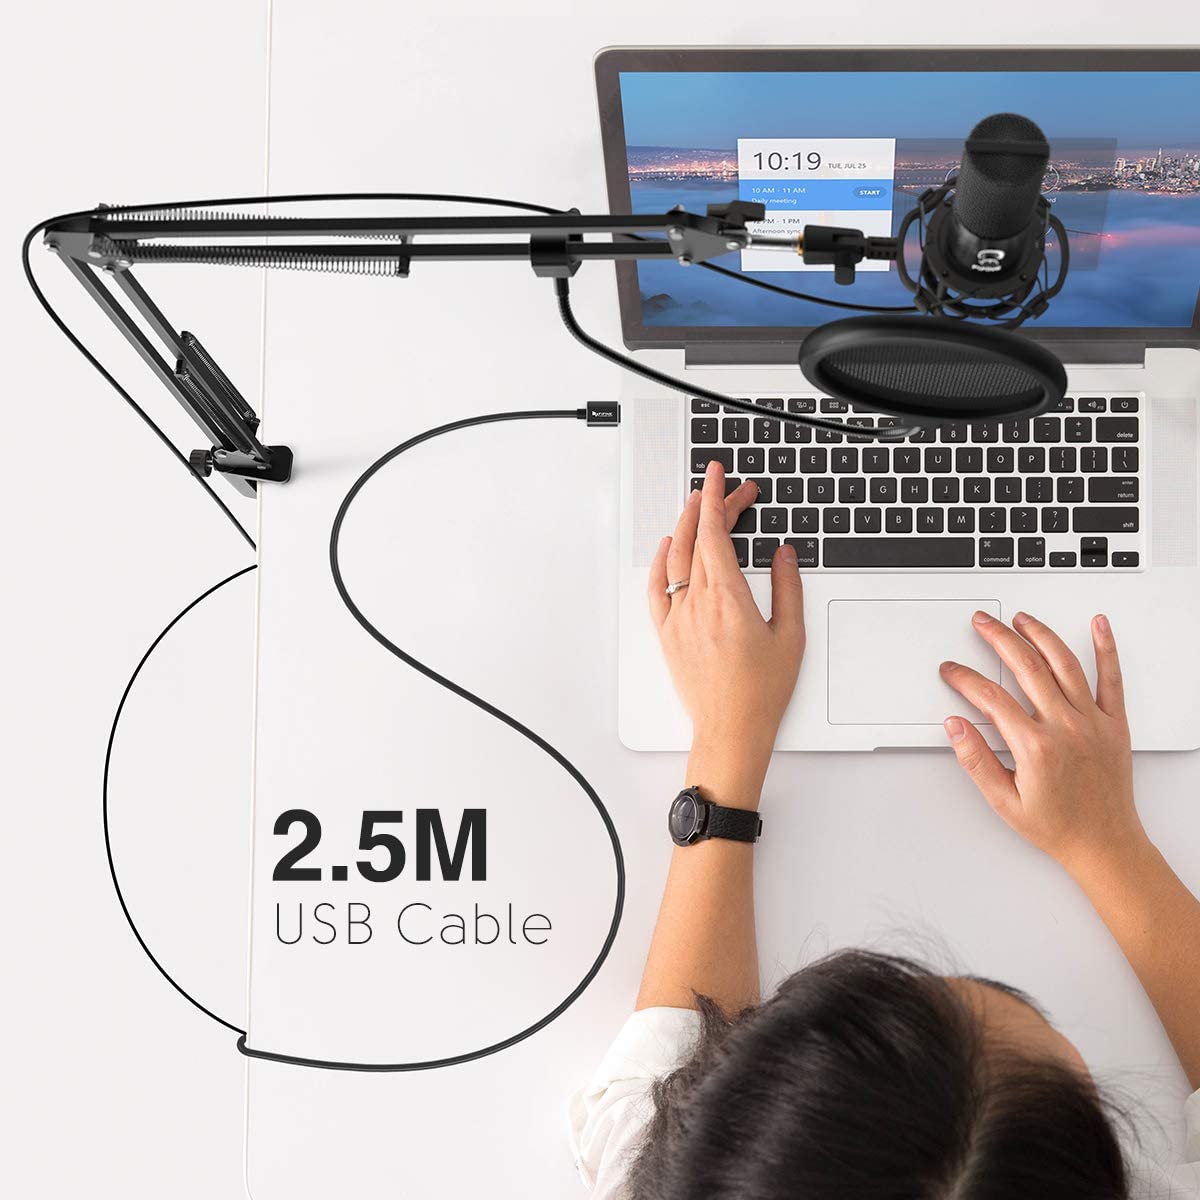 Fifine T669 Studio Condenser USB Microphone Computer PC Microphone Kit with Adjustable Scissor Arm Stand Shock Mount for Instruments Voice Overs Recording Podcasting YouTube Karaoke Gaming Streaming